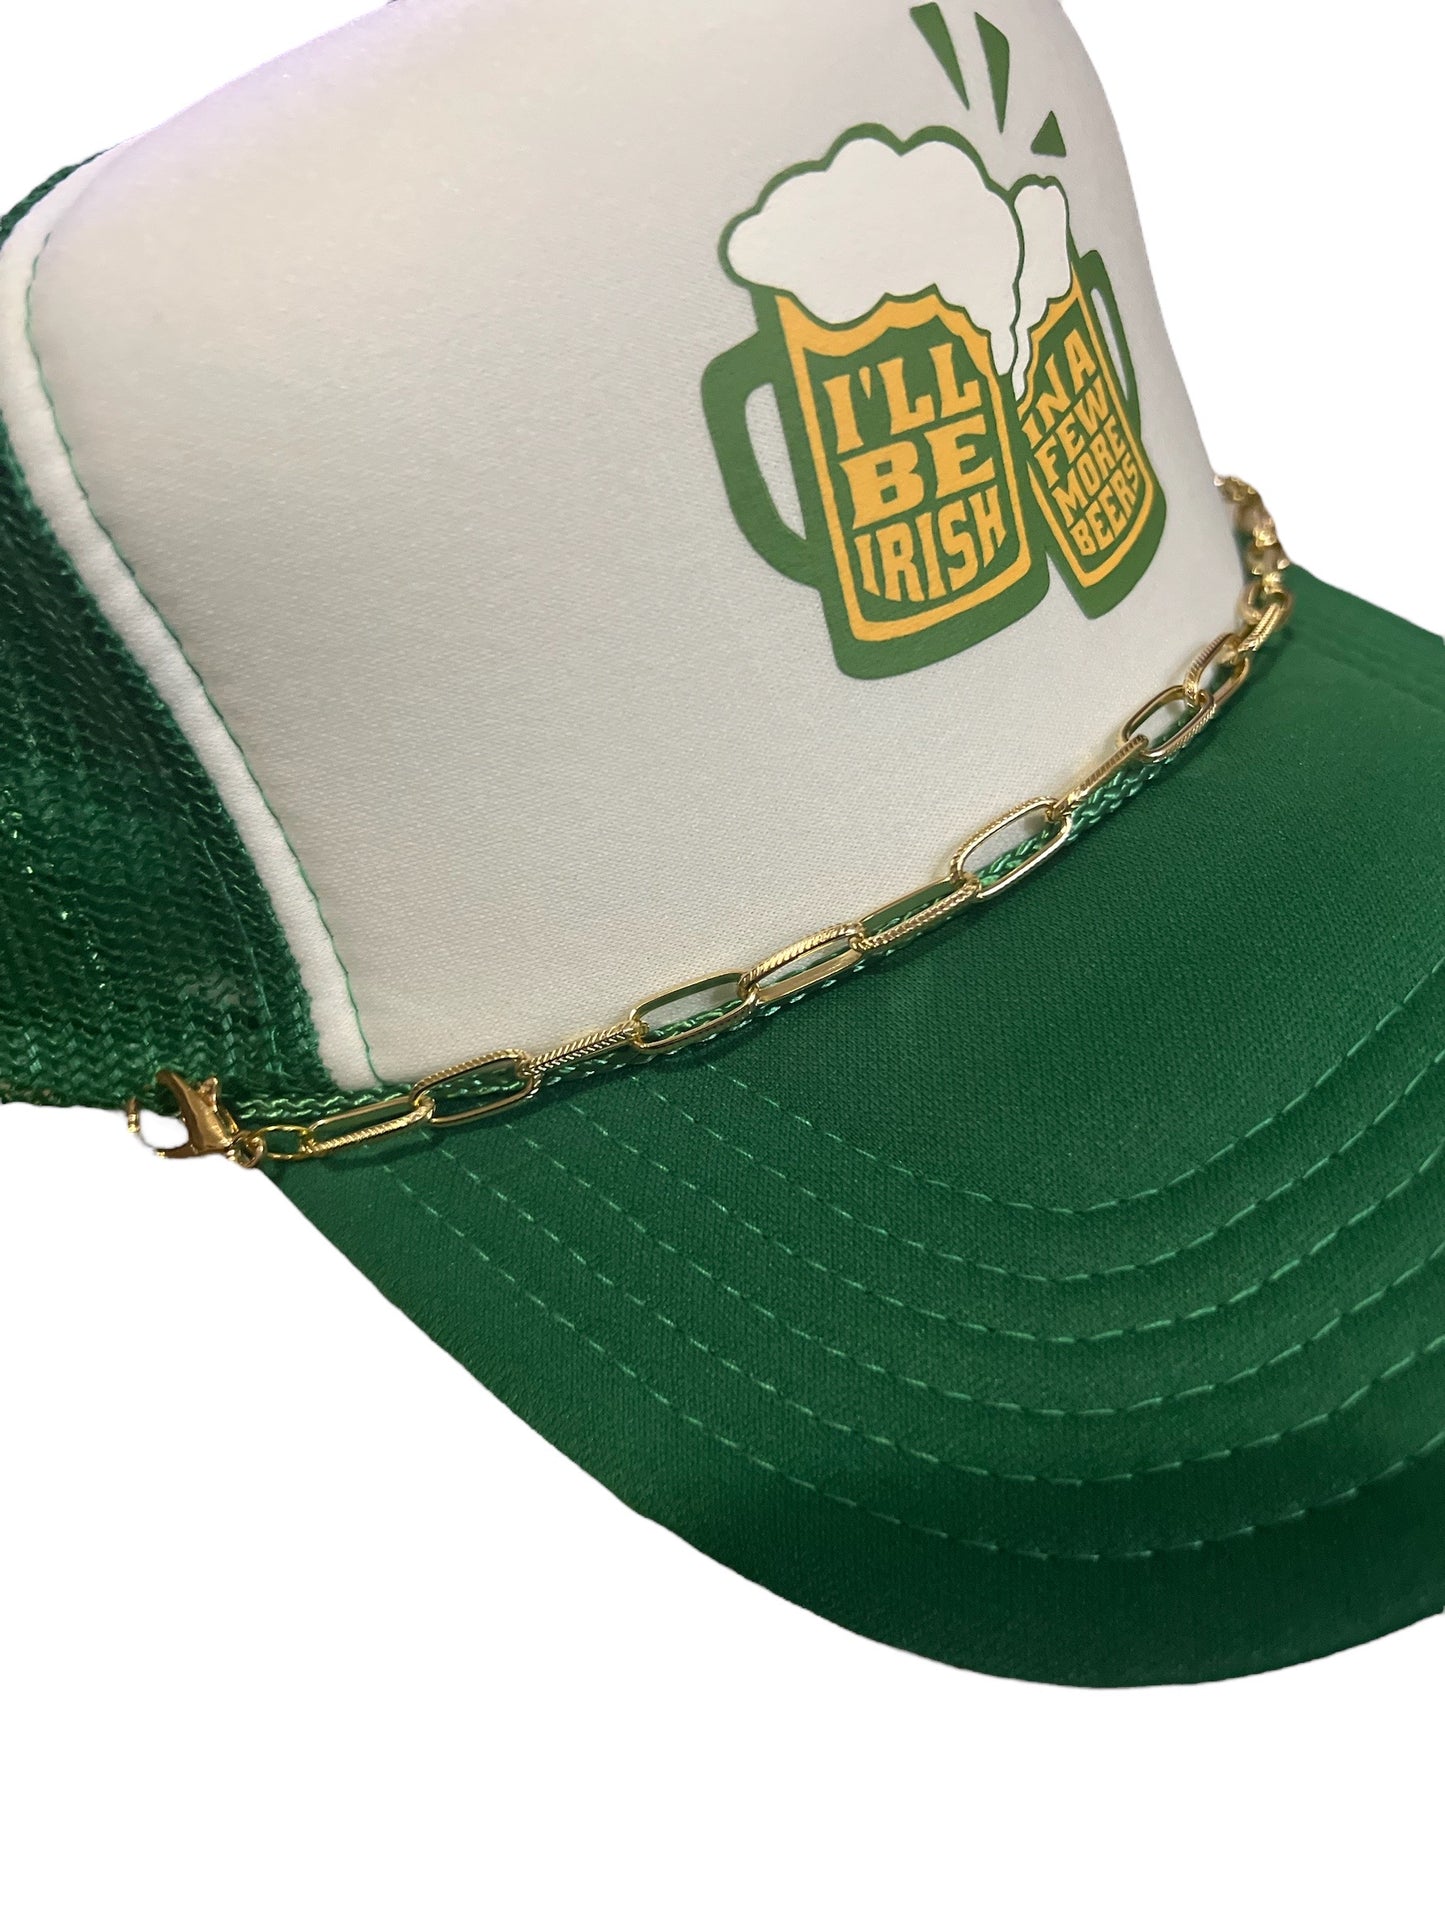 I’ll Be Irish In A Few More Beers Trucker Hat